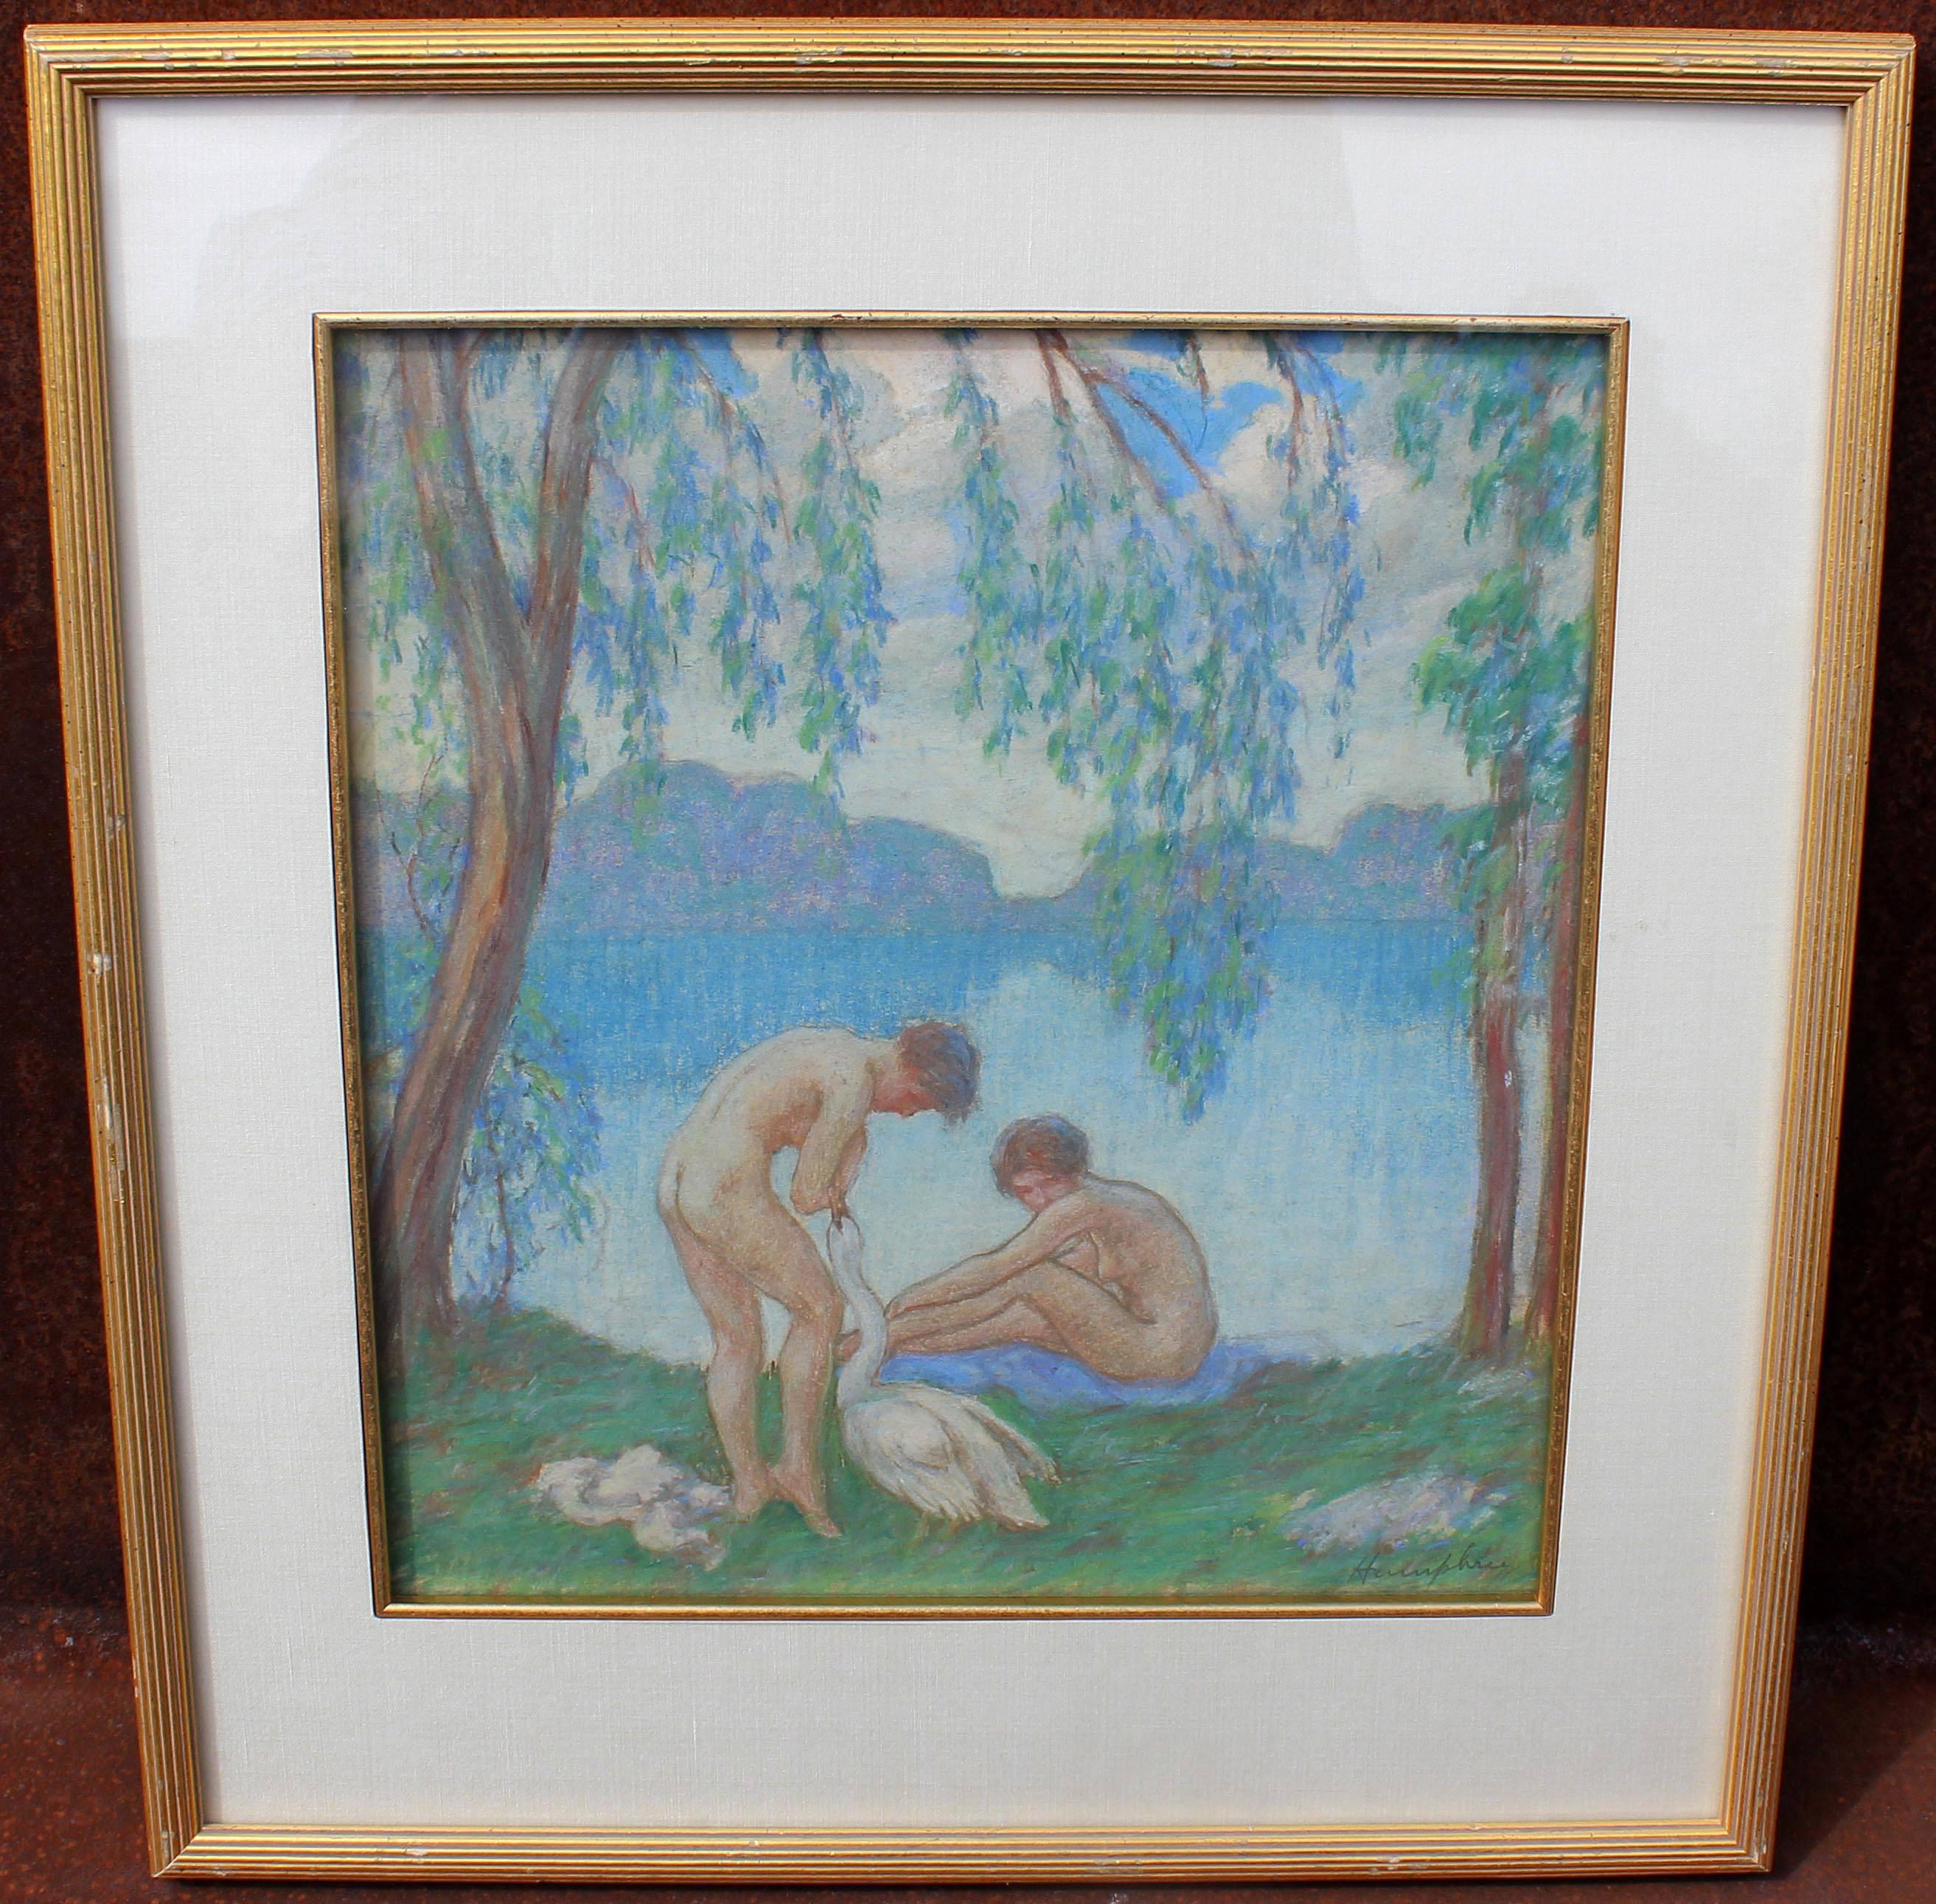 Nude bathers, fine early 20th century impressionist painting by David Humphrey (American 1872-1950.) Pastel on paper.
Humphrey was born in Elkhorn, Wisconsin in 1872. He studied at the Art Institute of Chicago and in Paris at the Julien Academy and